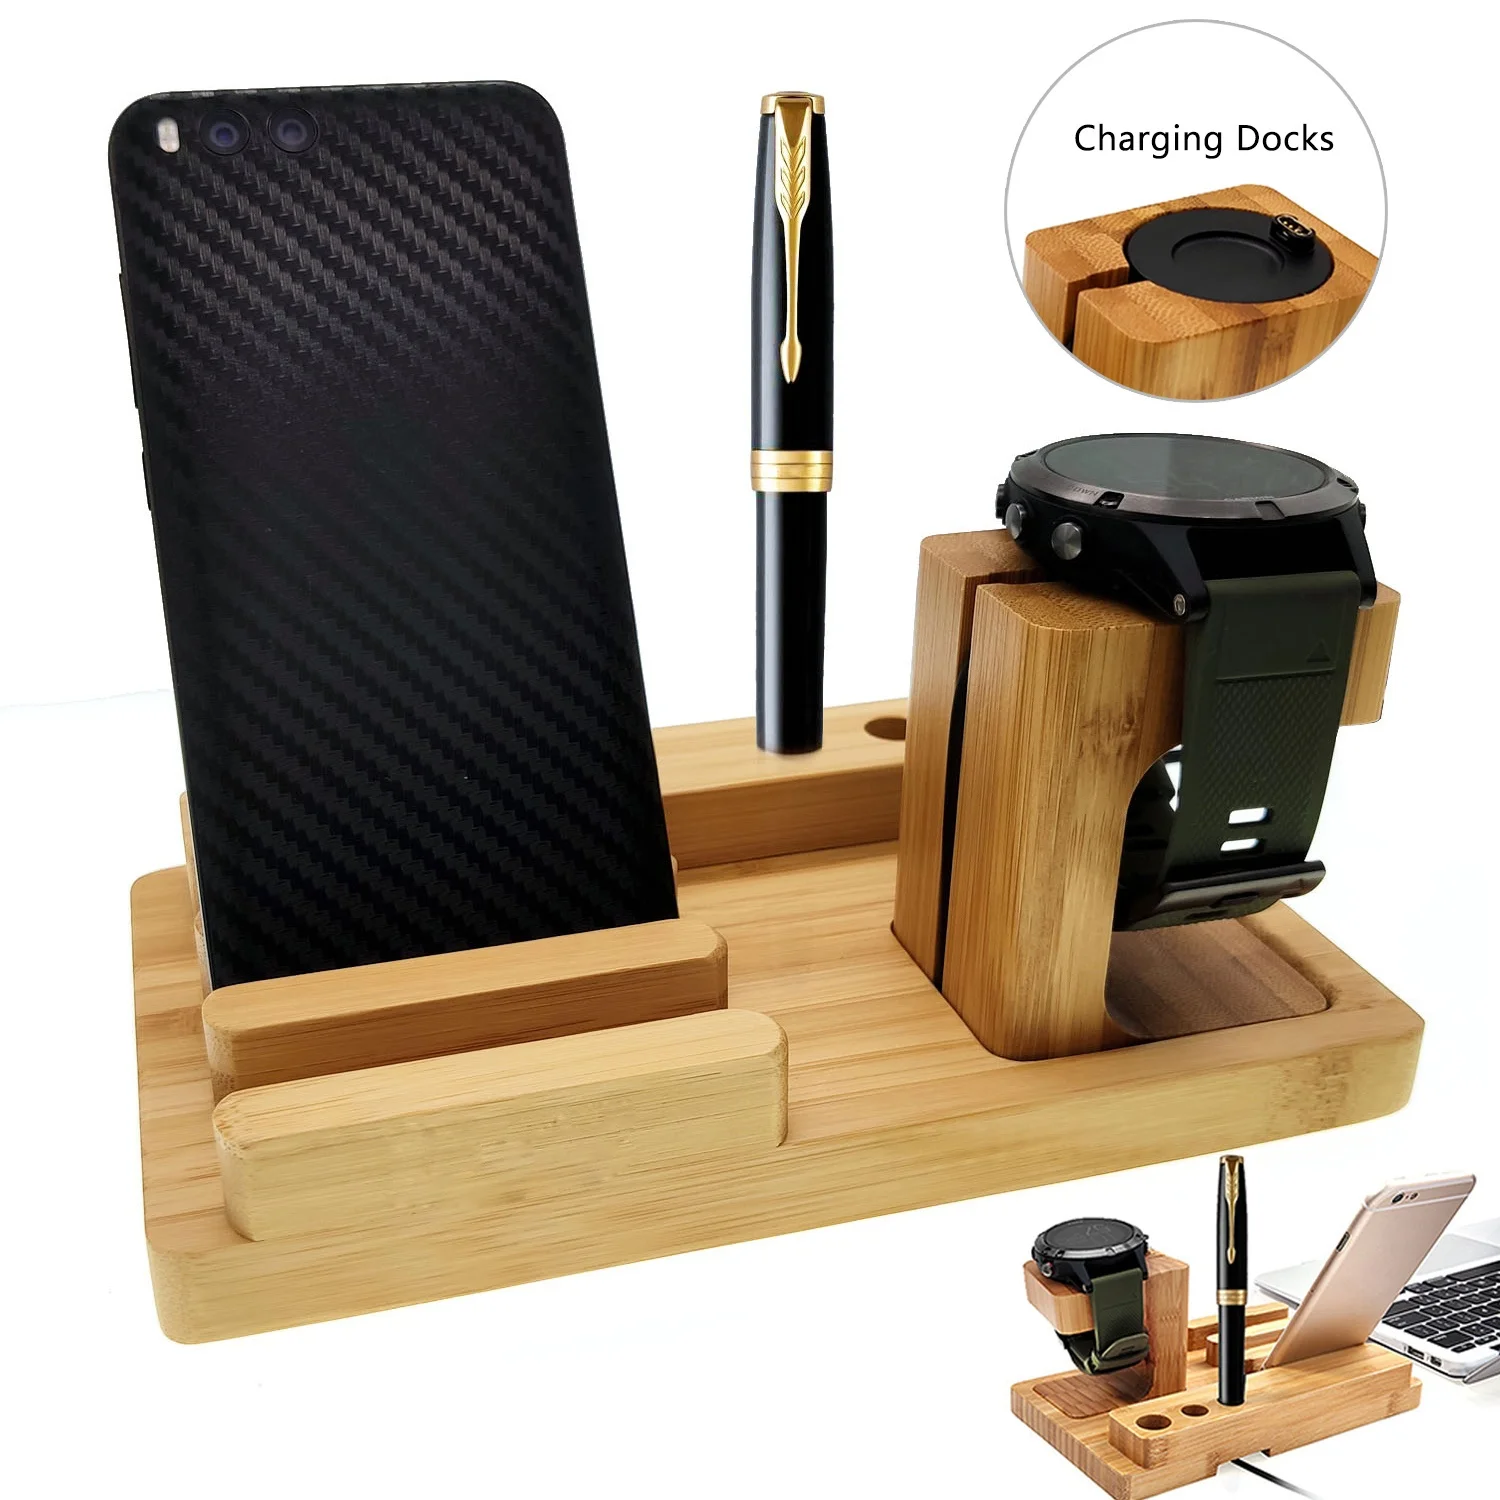 Fenix 6 Bamboo Wood Fenix Charger Charing Dock Holder For Garmin Fenix 5/5x/ 5s/desk Station Organizer With Charing Cable - Smart Accessories -  AliExpress